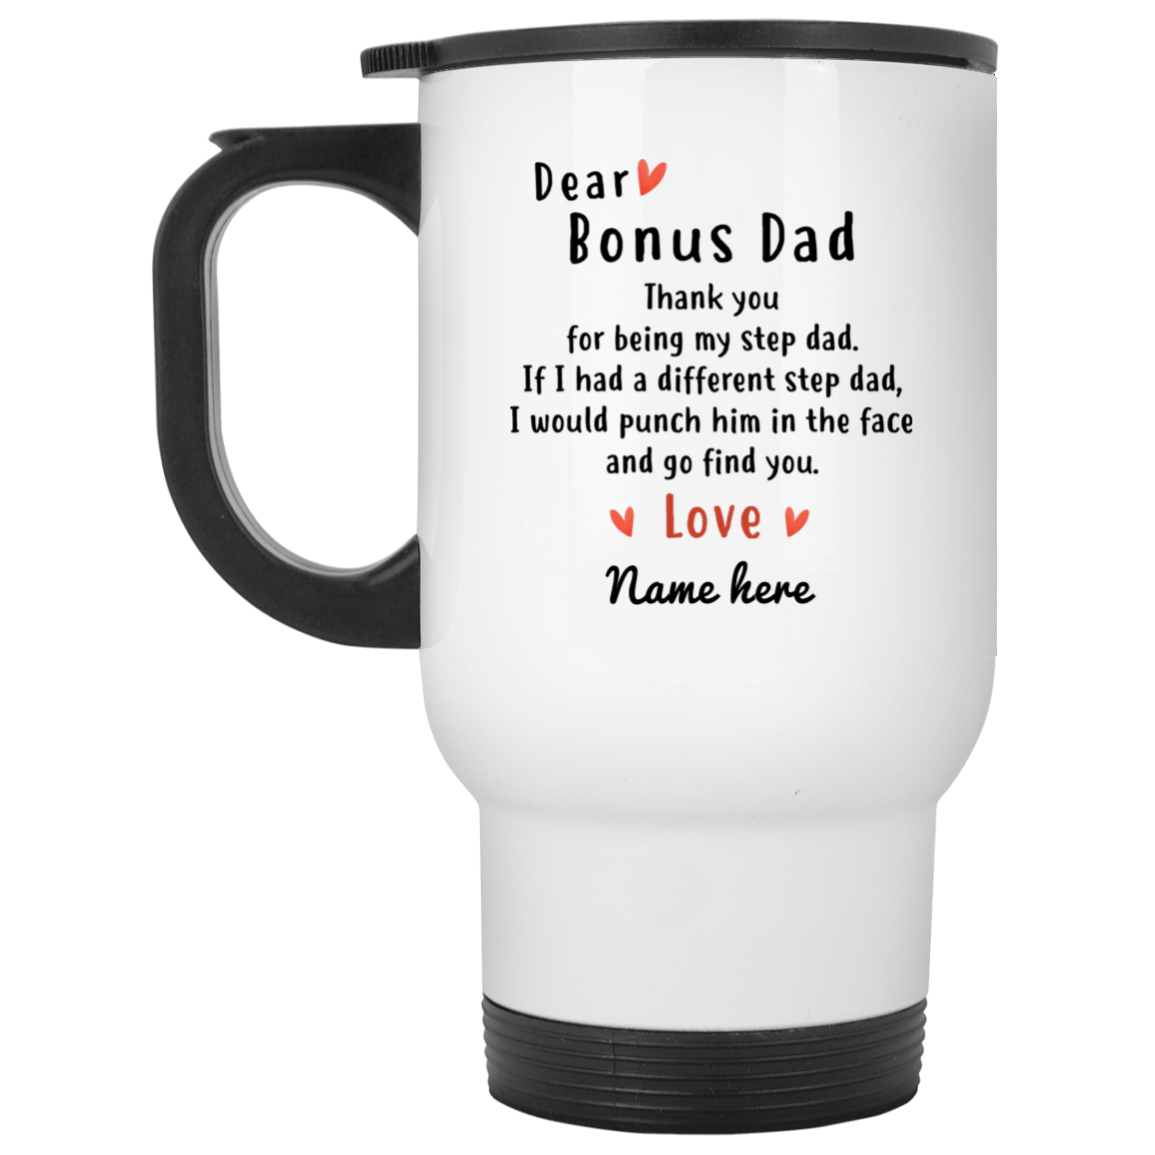 Personalized Father's Day Gifts for Dad - Custom Christmas Gifts for Father